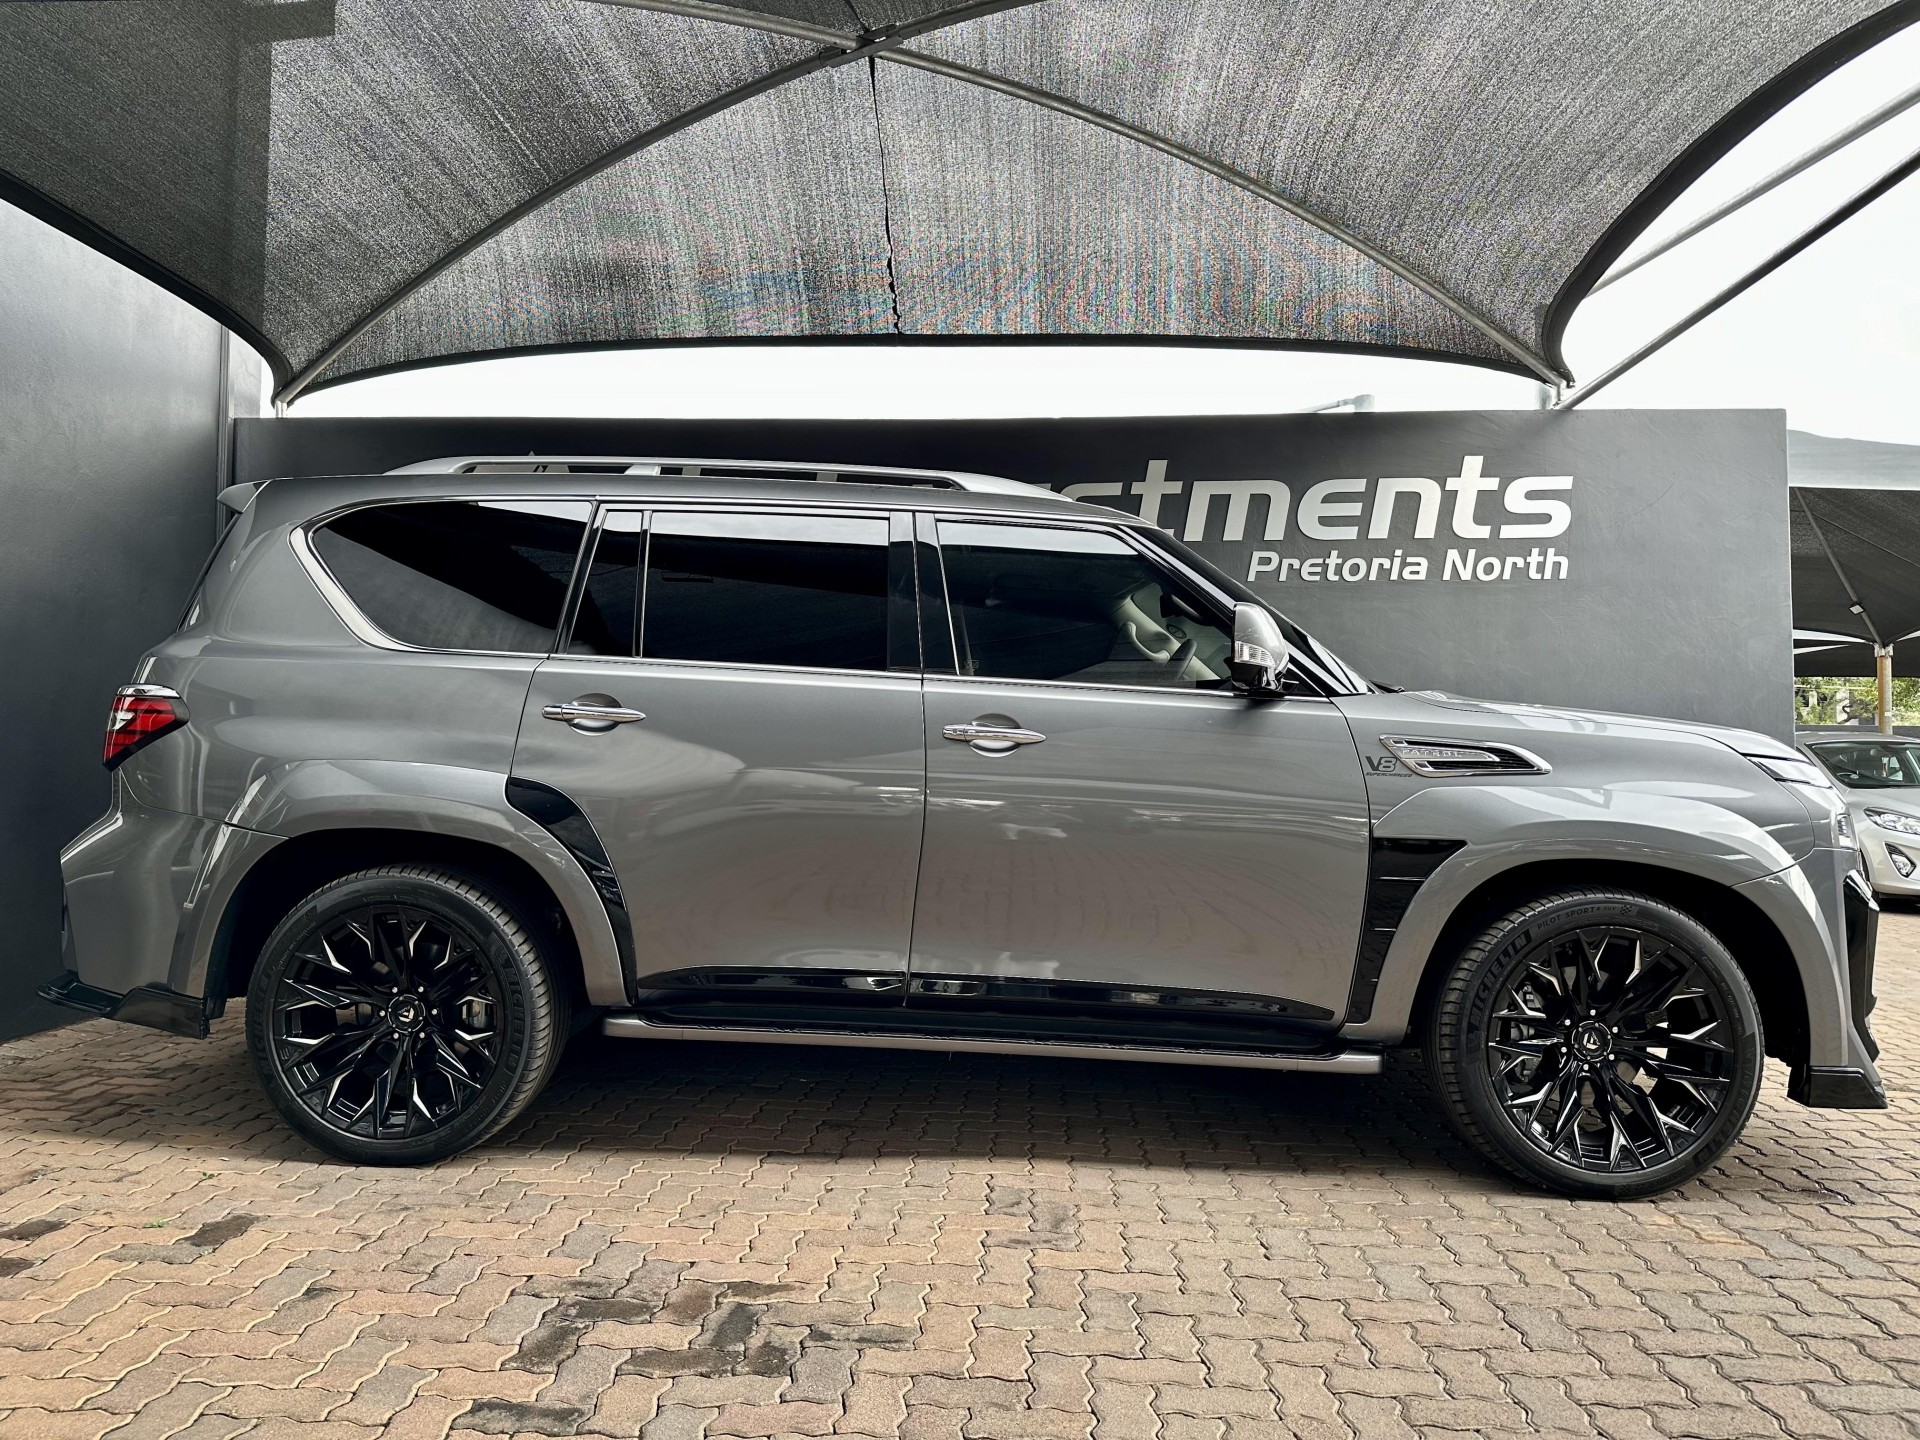 Nissan Patrol Black Hawk Is A Supercharged V8 South African Special